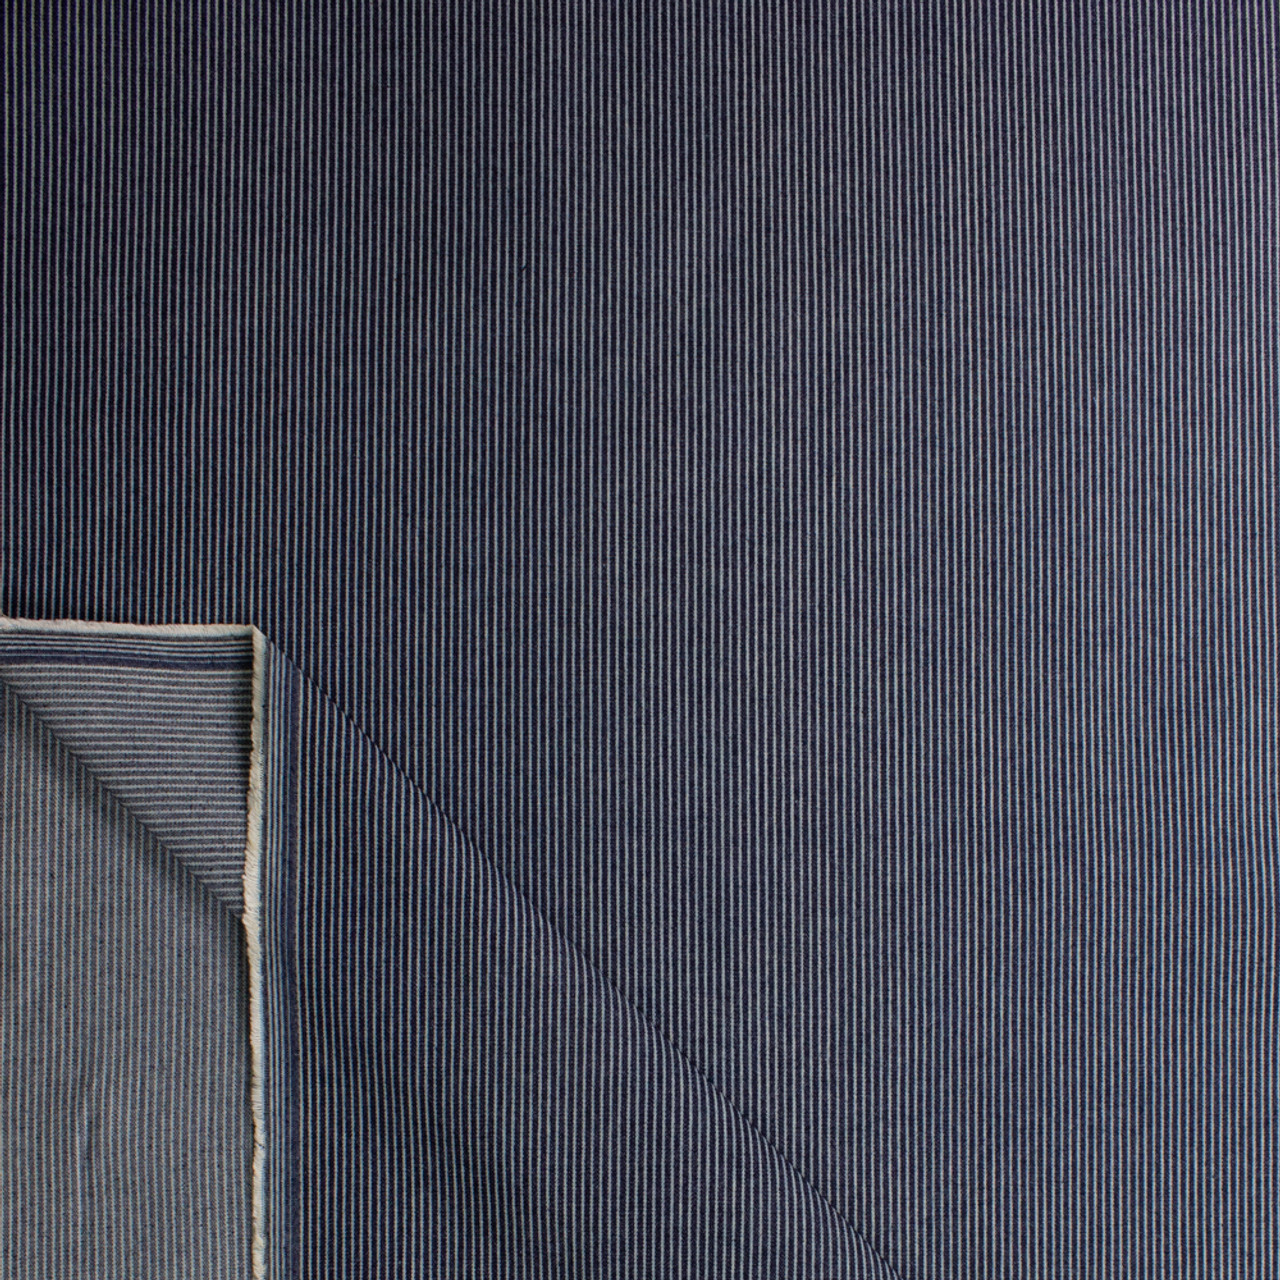 Denim Fabrics, Buy Online by the Metre from 5,00€